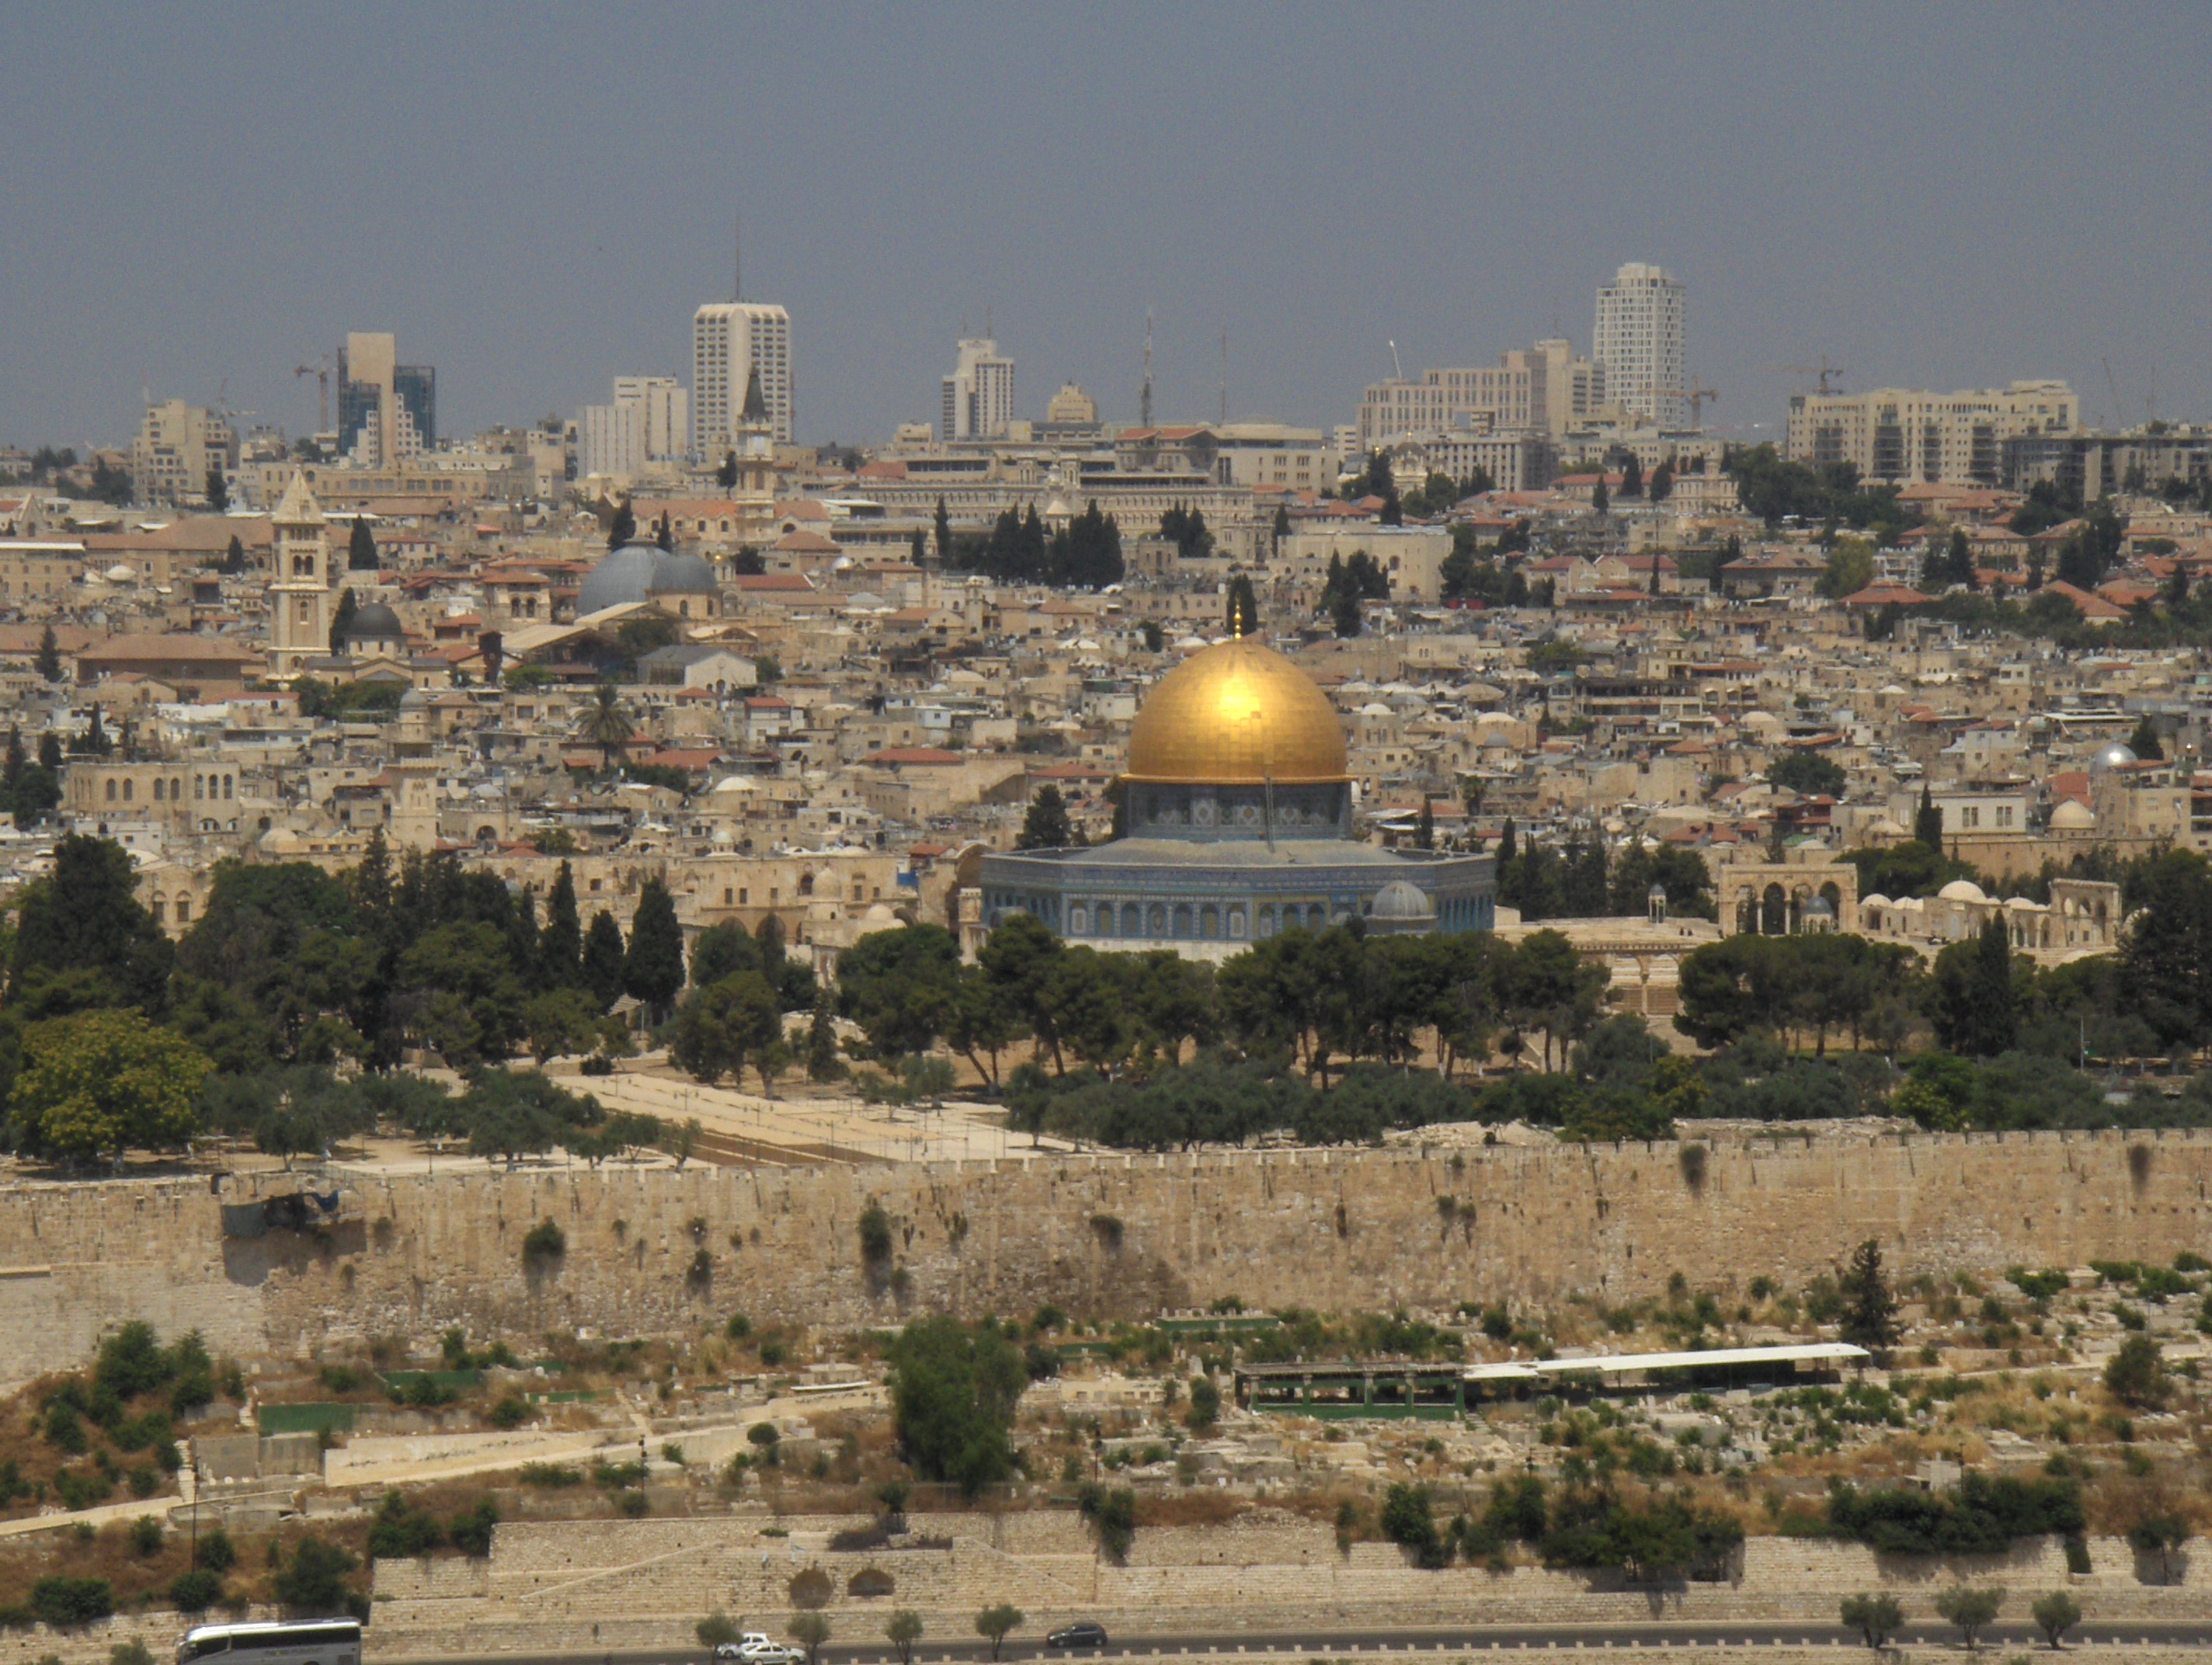 A view of the city of Jerusalem from the top of the Mount of Olives.